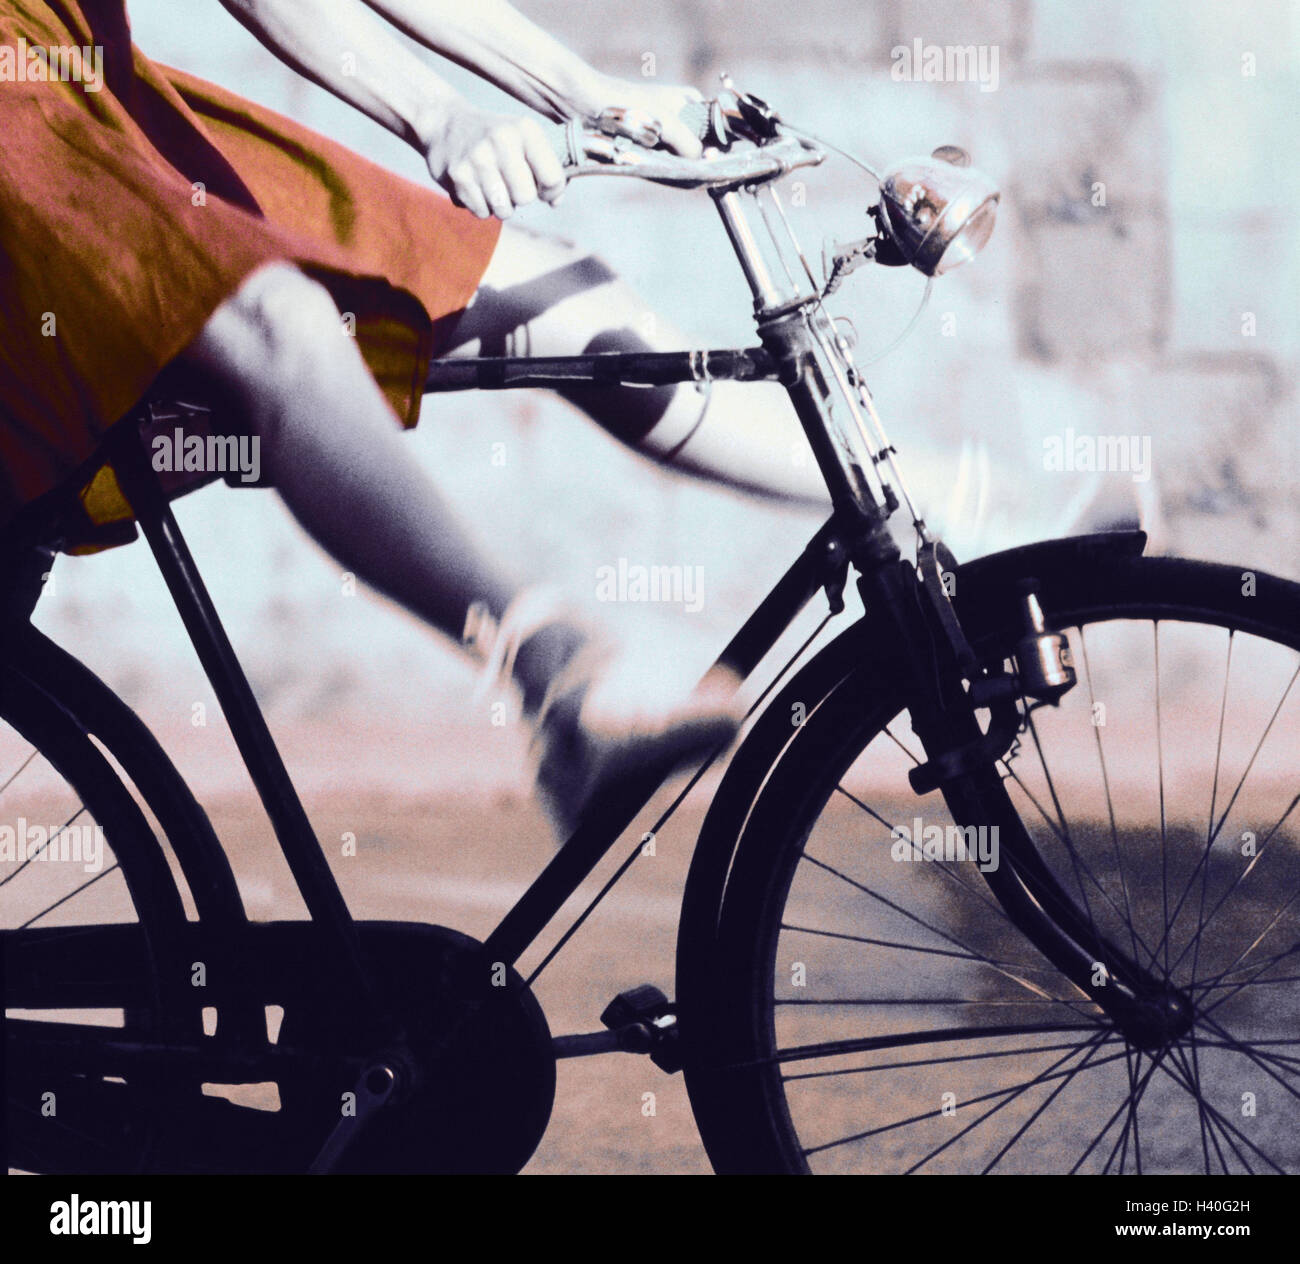 Woman, bicycle driving, happy, melted, detail, young, riding of a bike,  bicycle, old, nostalgically, fun, joy, joy life, feeling, elation,  cheerfulness, exuberance, joy living, happy, exhilarates, rock, bones lift,  b/w, coloriert very